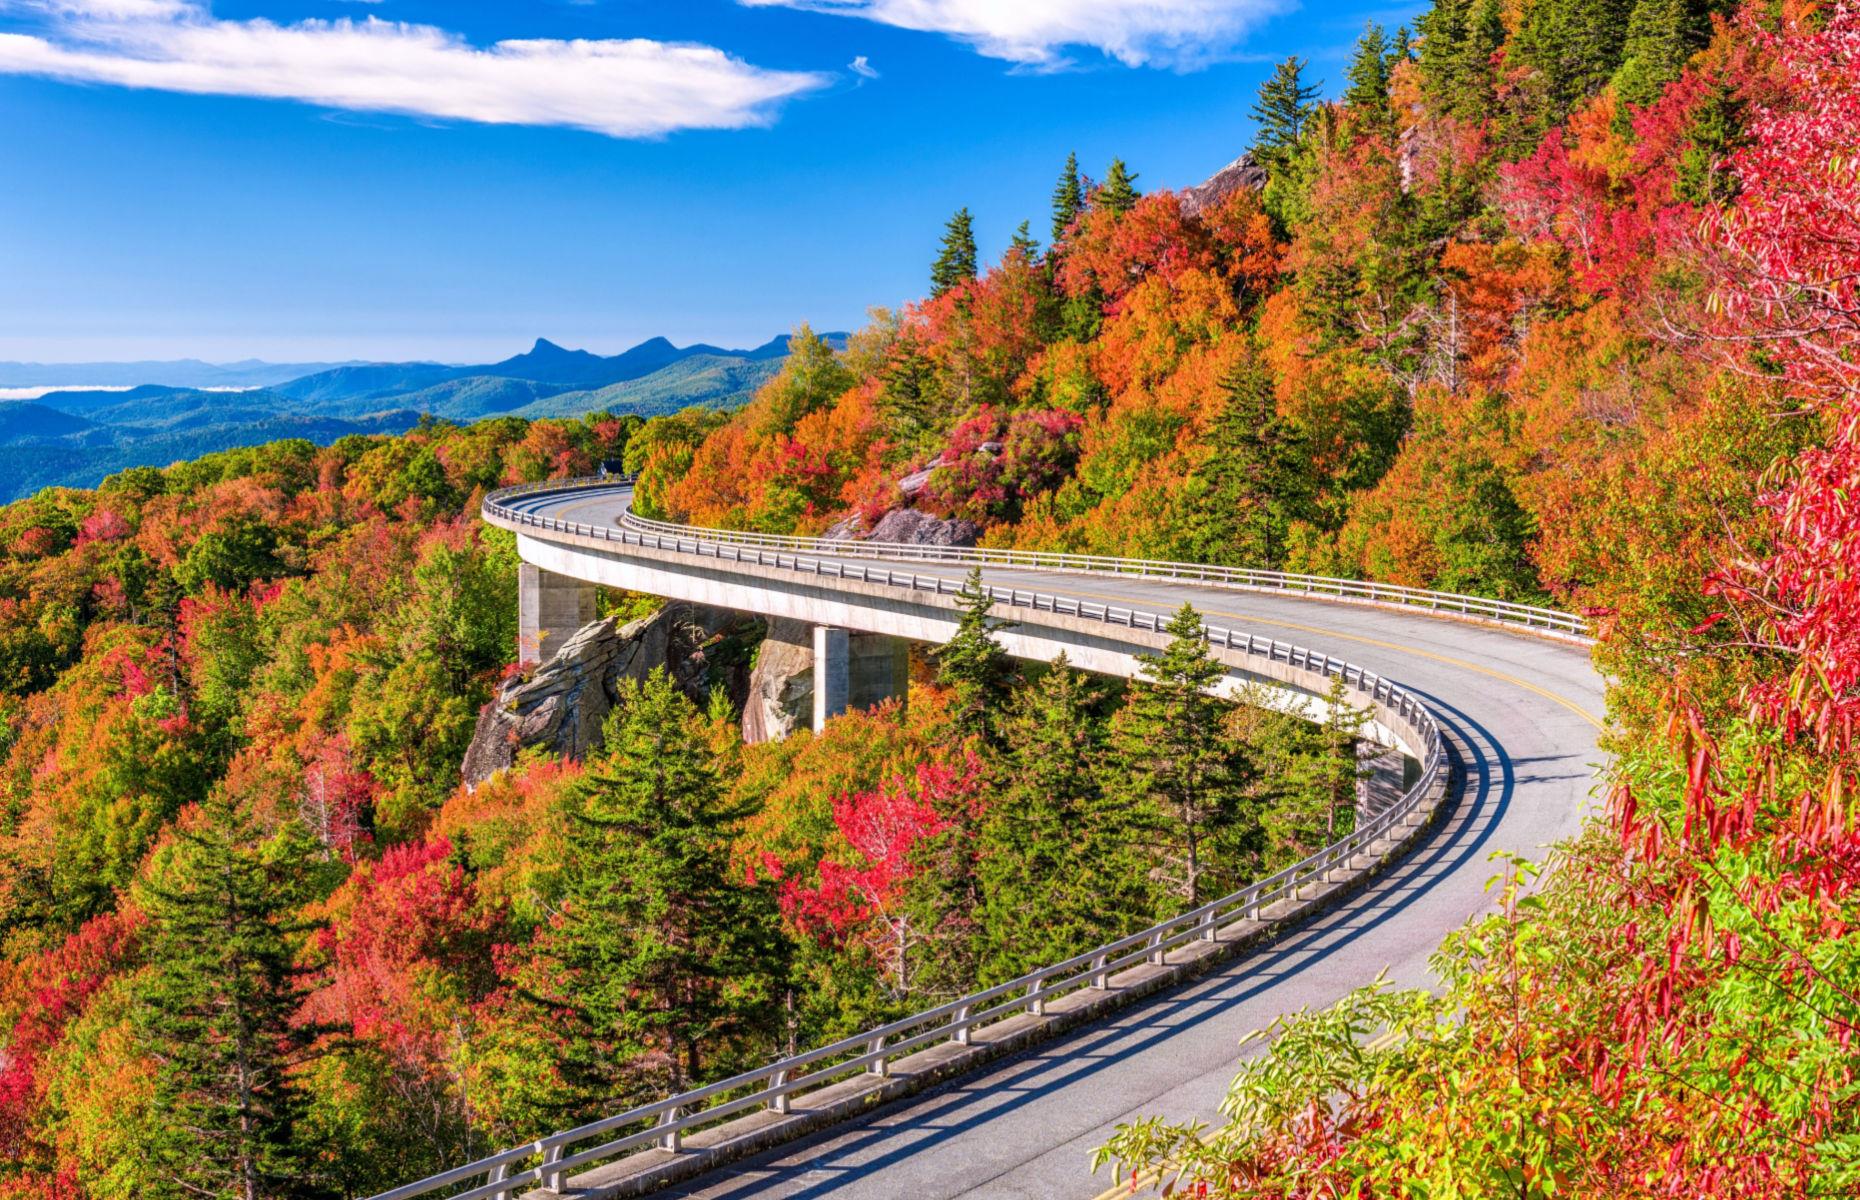 <p>Another classic road trip route, <a href="https://www.blueridgeparkway.org/">Blue Ridge Parkway</a> is embarrassingly rich in natural beauty and wonders. Spanning two states and around 470 miles (756km), it’s easily doable over a week even with all the stops you’re bound to make, because the road, which sprawls from Virginia’s Shenandoah National Park to the Great Smoky Mountains National Park, offers plenty to see and do. It’s also easy to follow, which means fewer opportunities to get lost and, in turn, fewer arguments.</p>